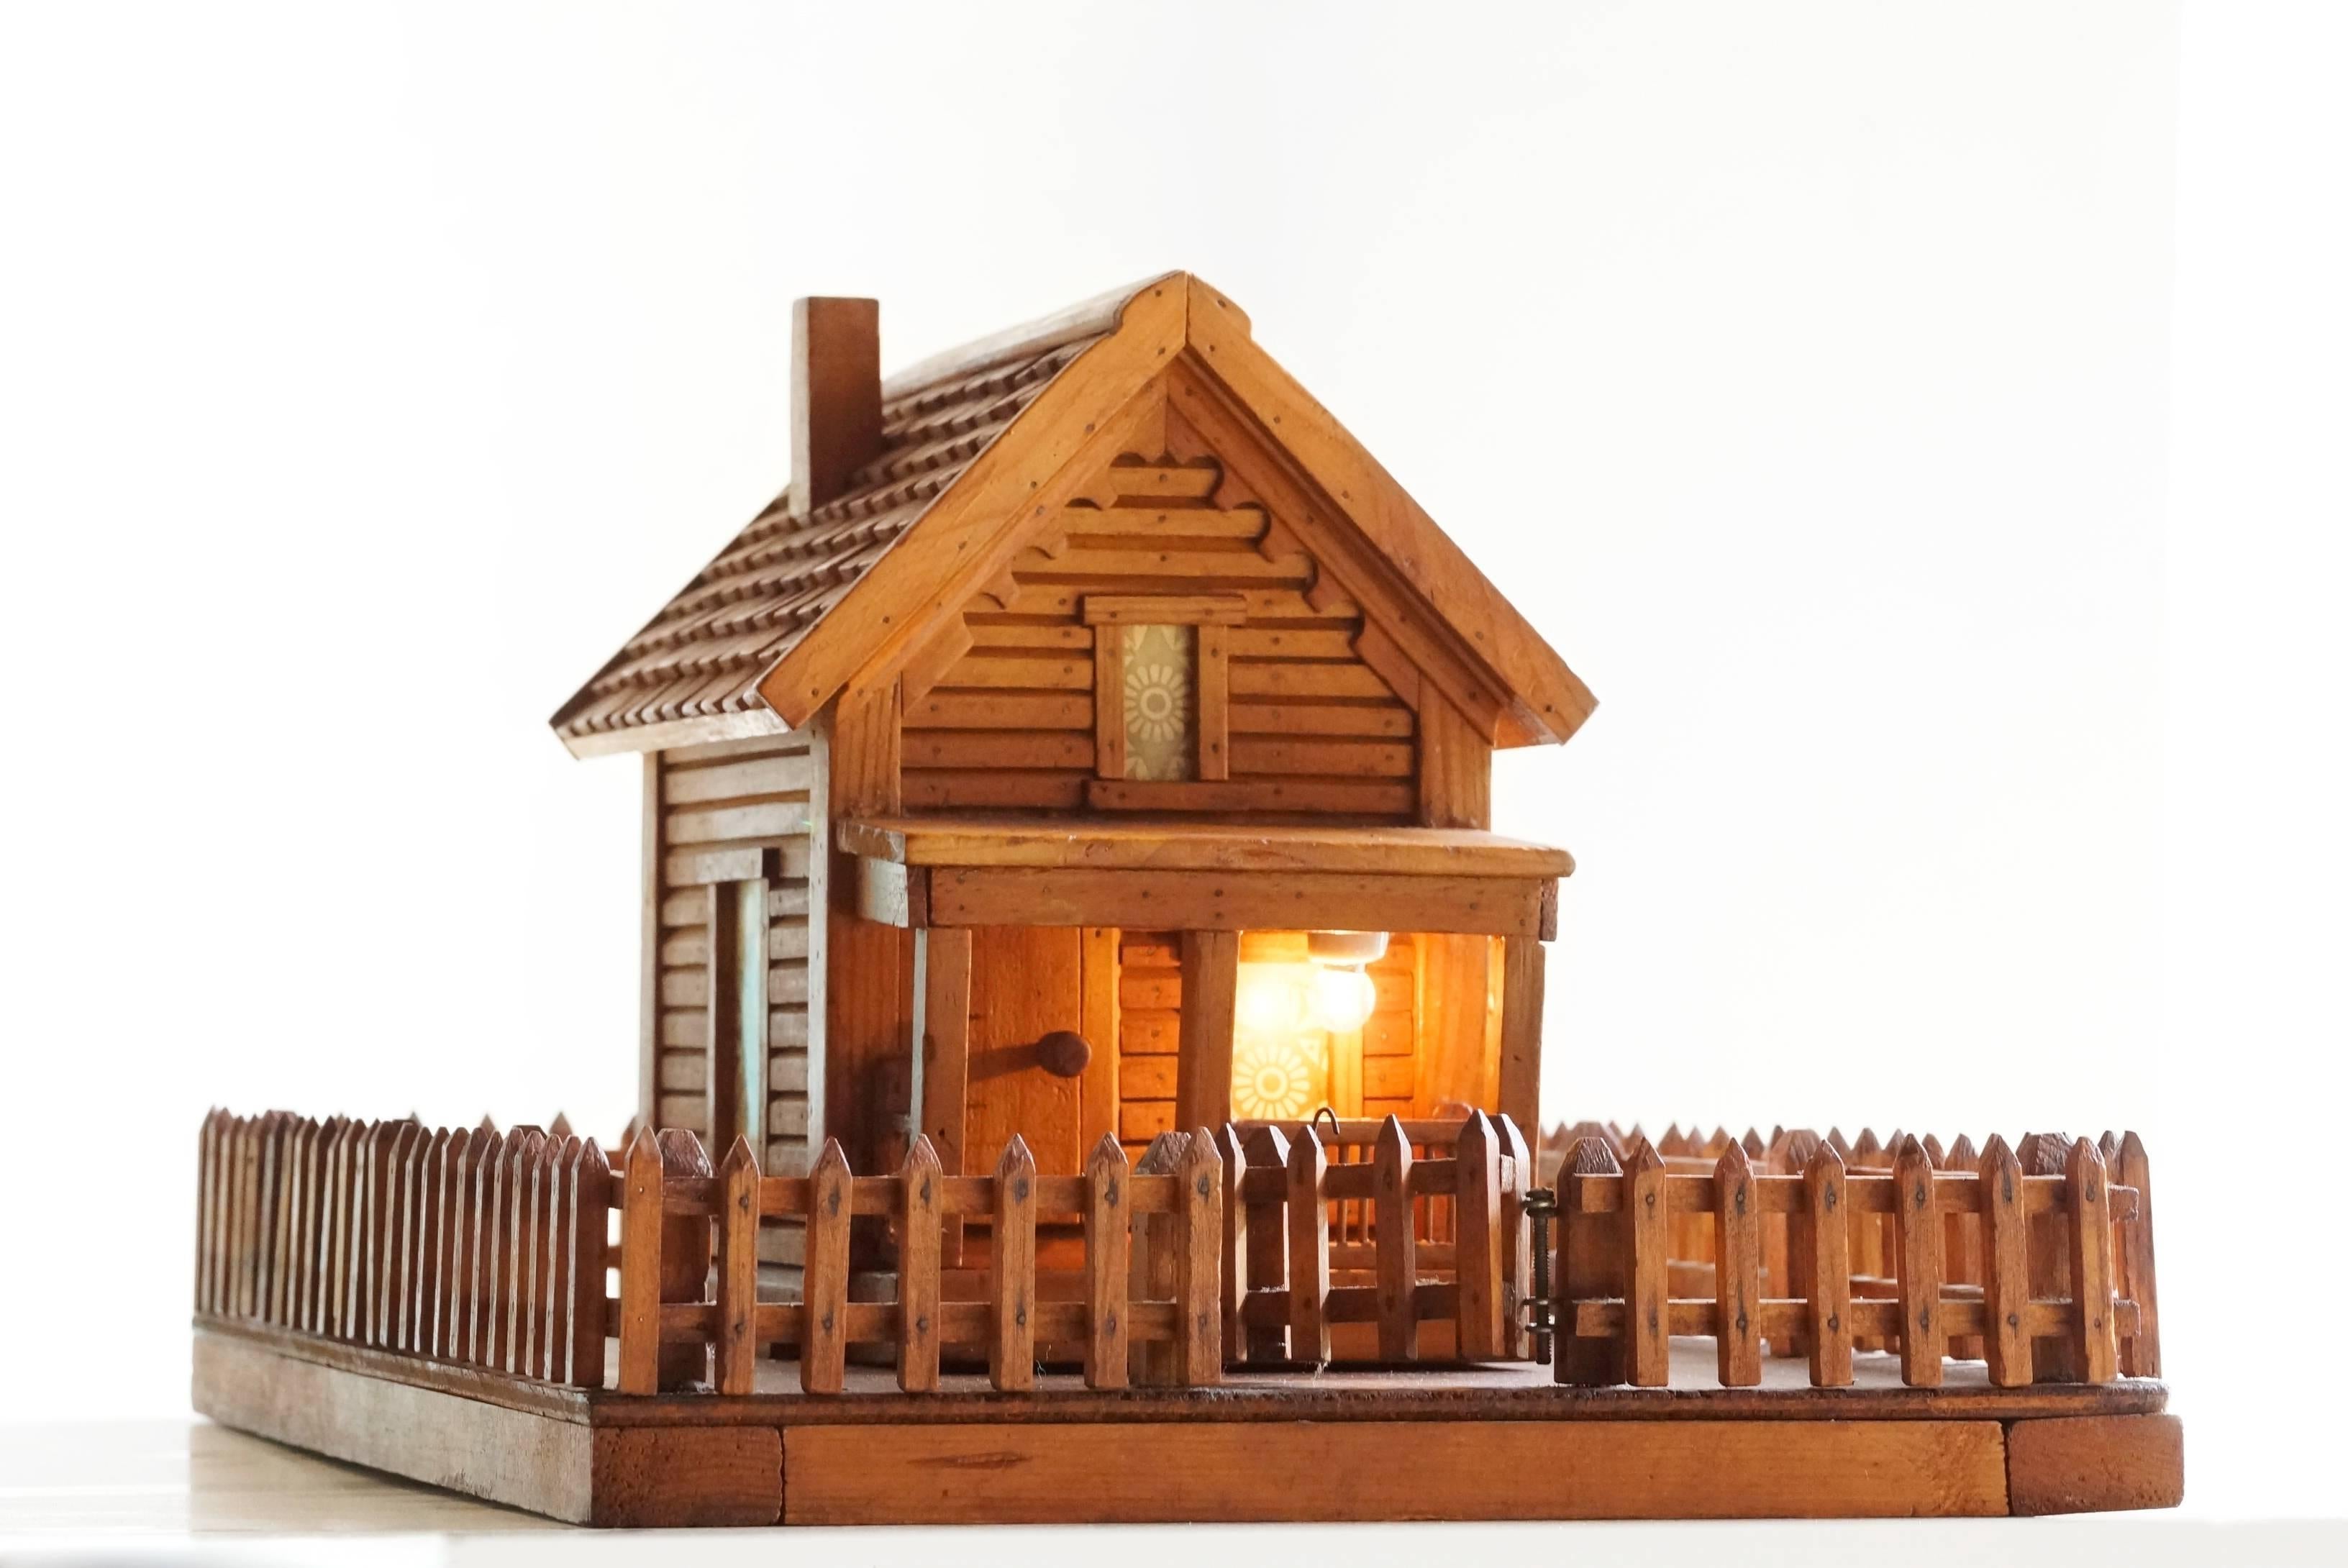 American Folk Art log cabin with working porch light. Absolute one-of-a-kind gem. Handmade of antique wood. Fully-functional and in excellent condition. Please note small blemish to right-hand window. 

Dimensions: 19